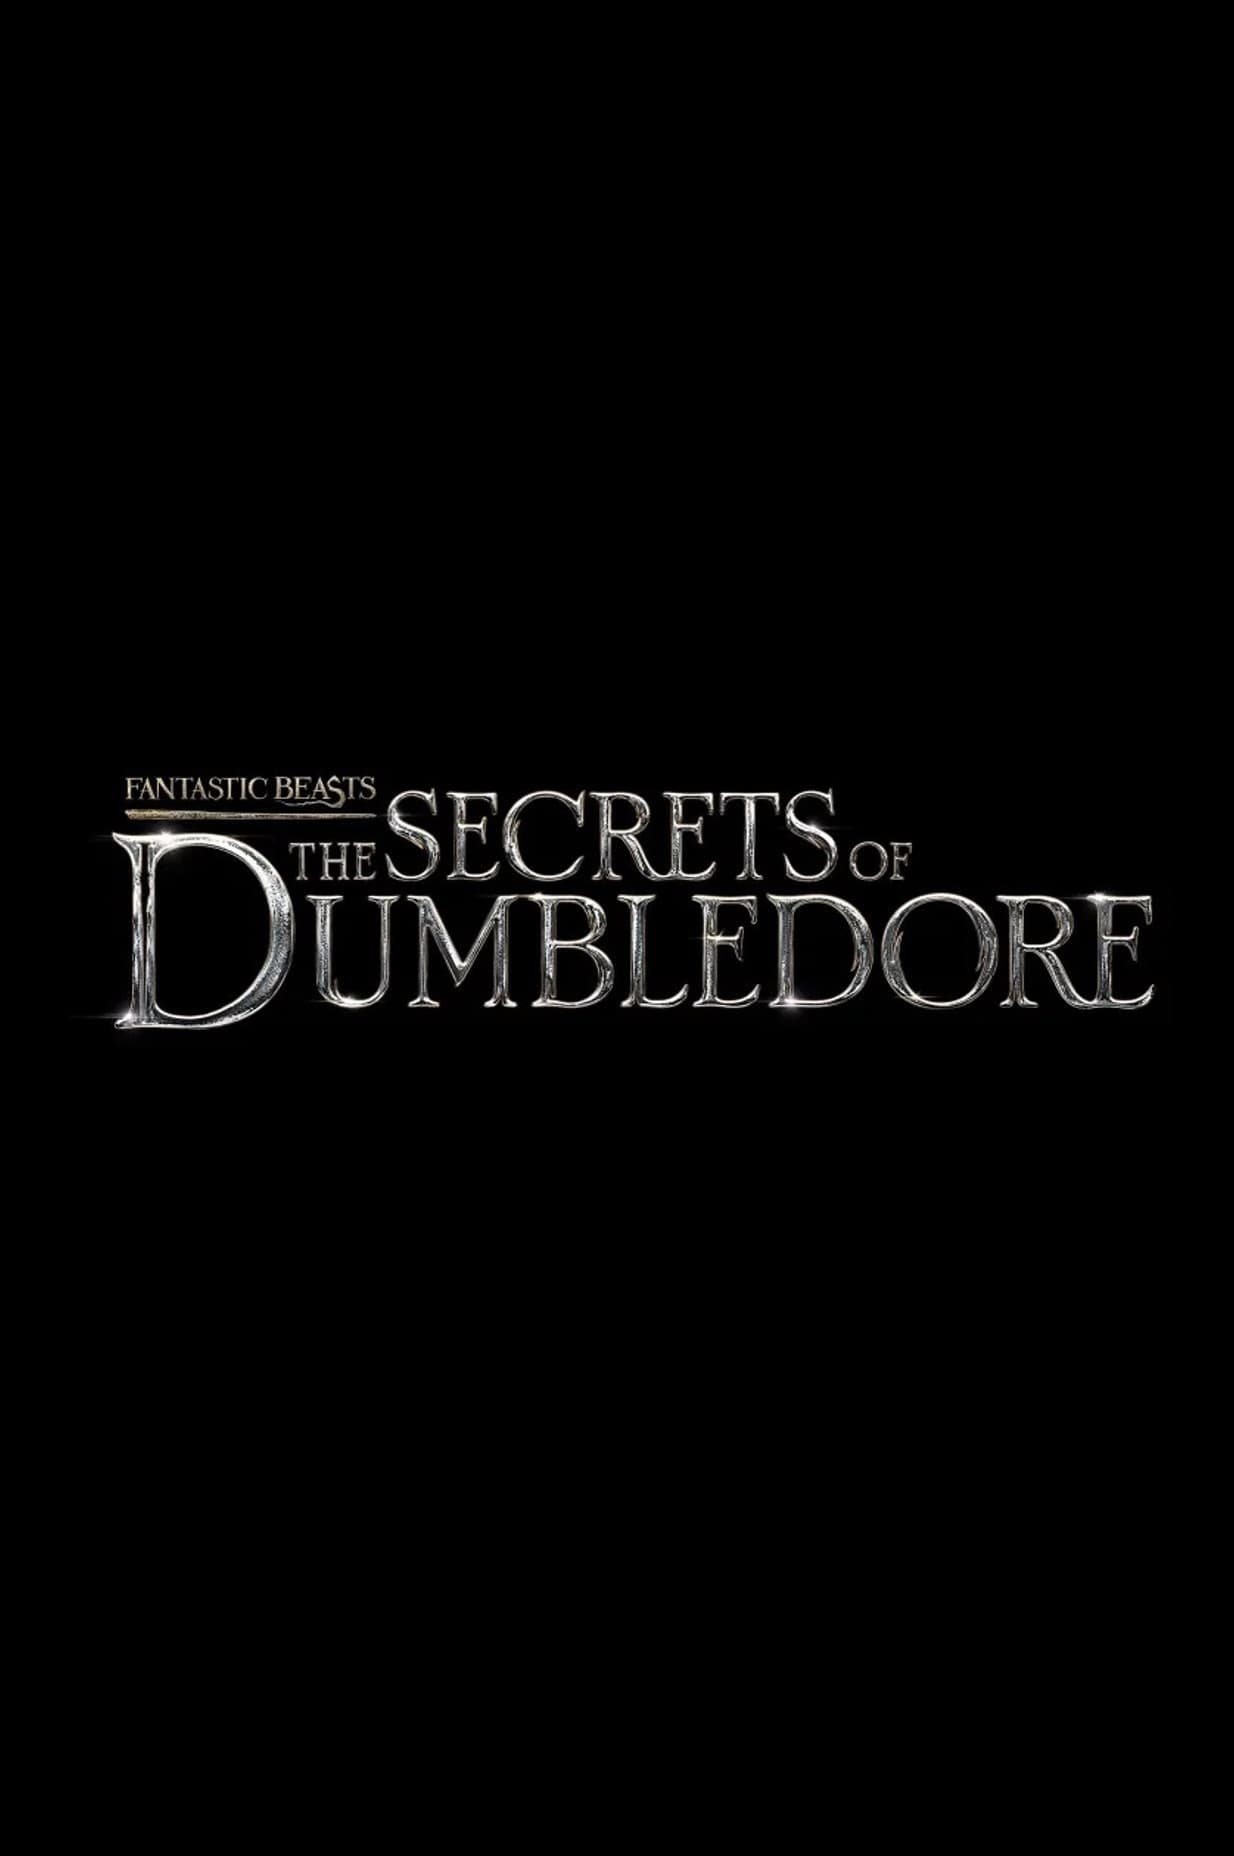 Poster for the movie "Fantastic Beasts: The Secrets of Dumbledore"